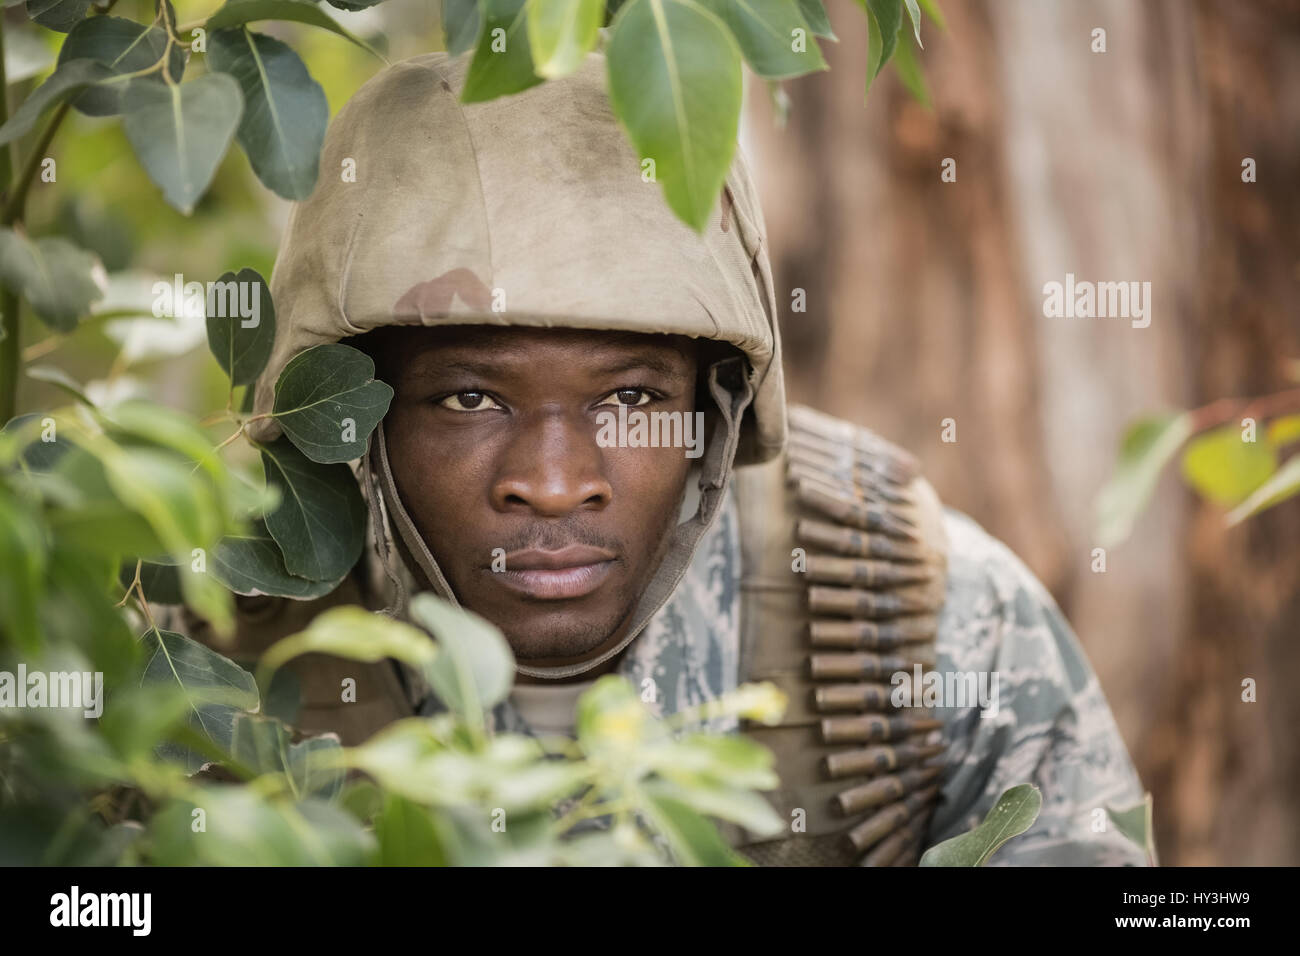 Military soldier hiding behind trees in boot camp Stock Photo